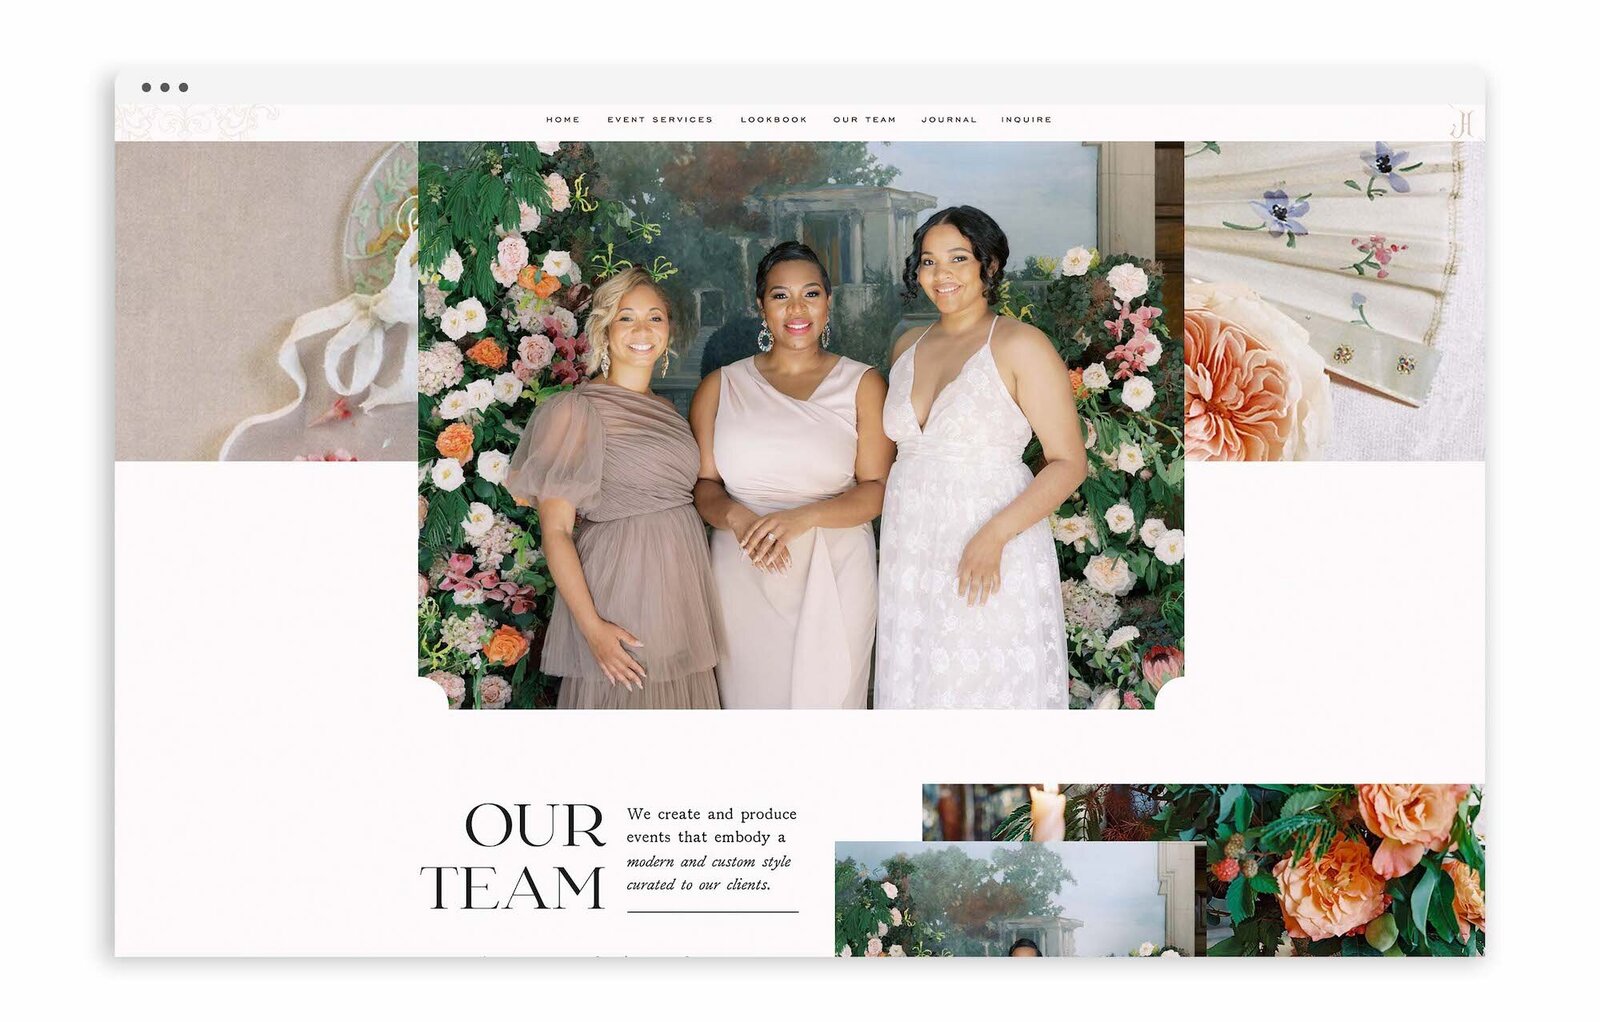 Custom Brand and Showit Website Design for Weddings by Susan Dunne - Best Branding and Website Designers for Creatives With Grace and Gold